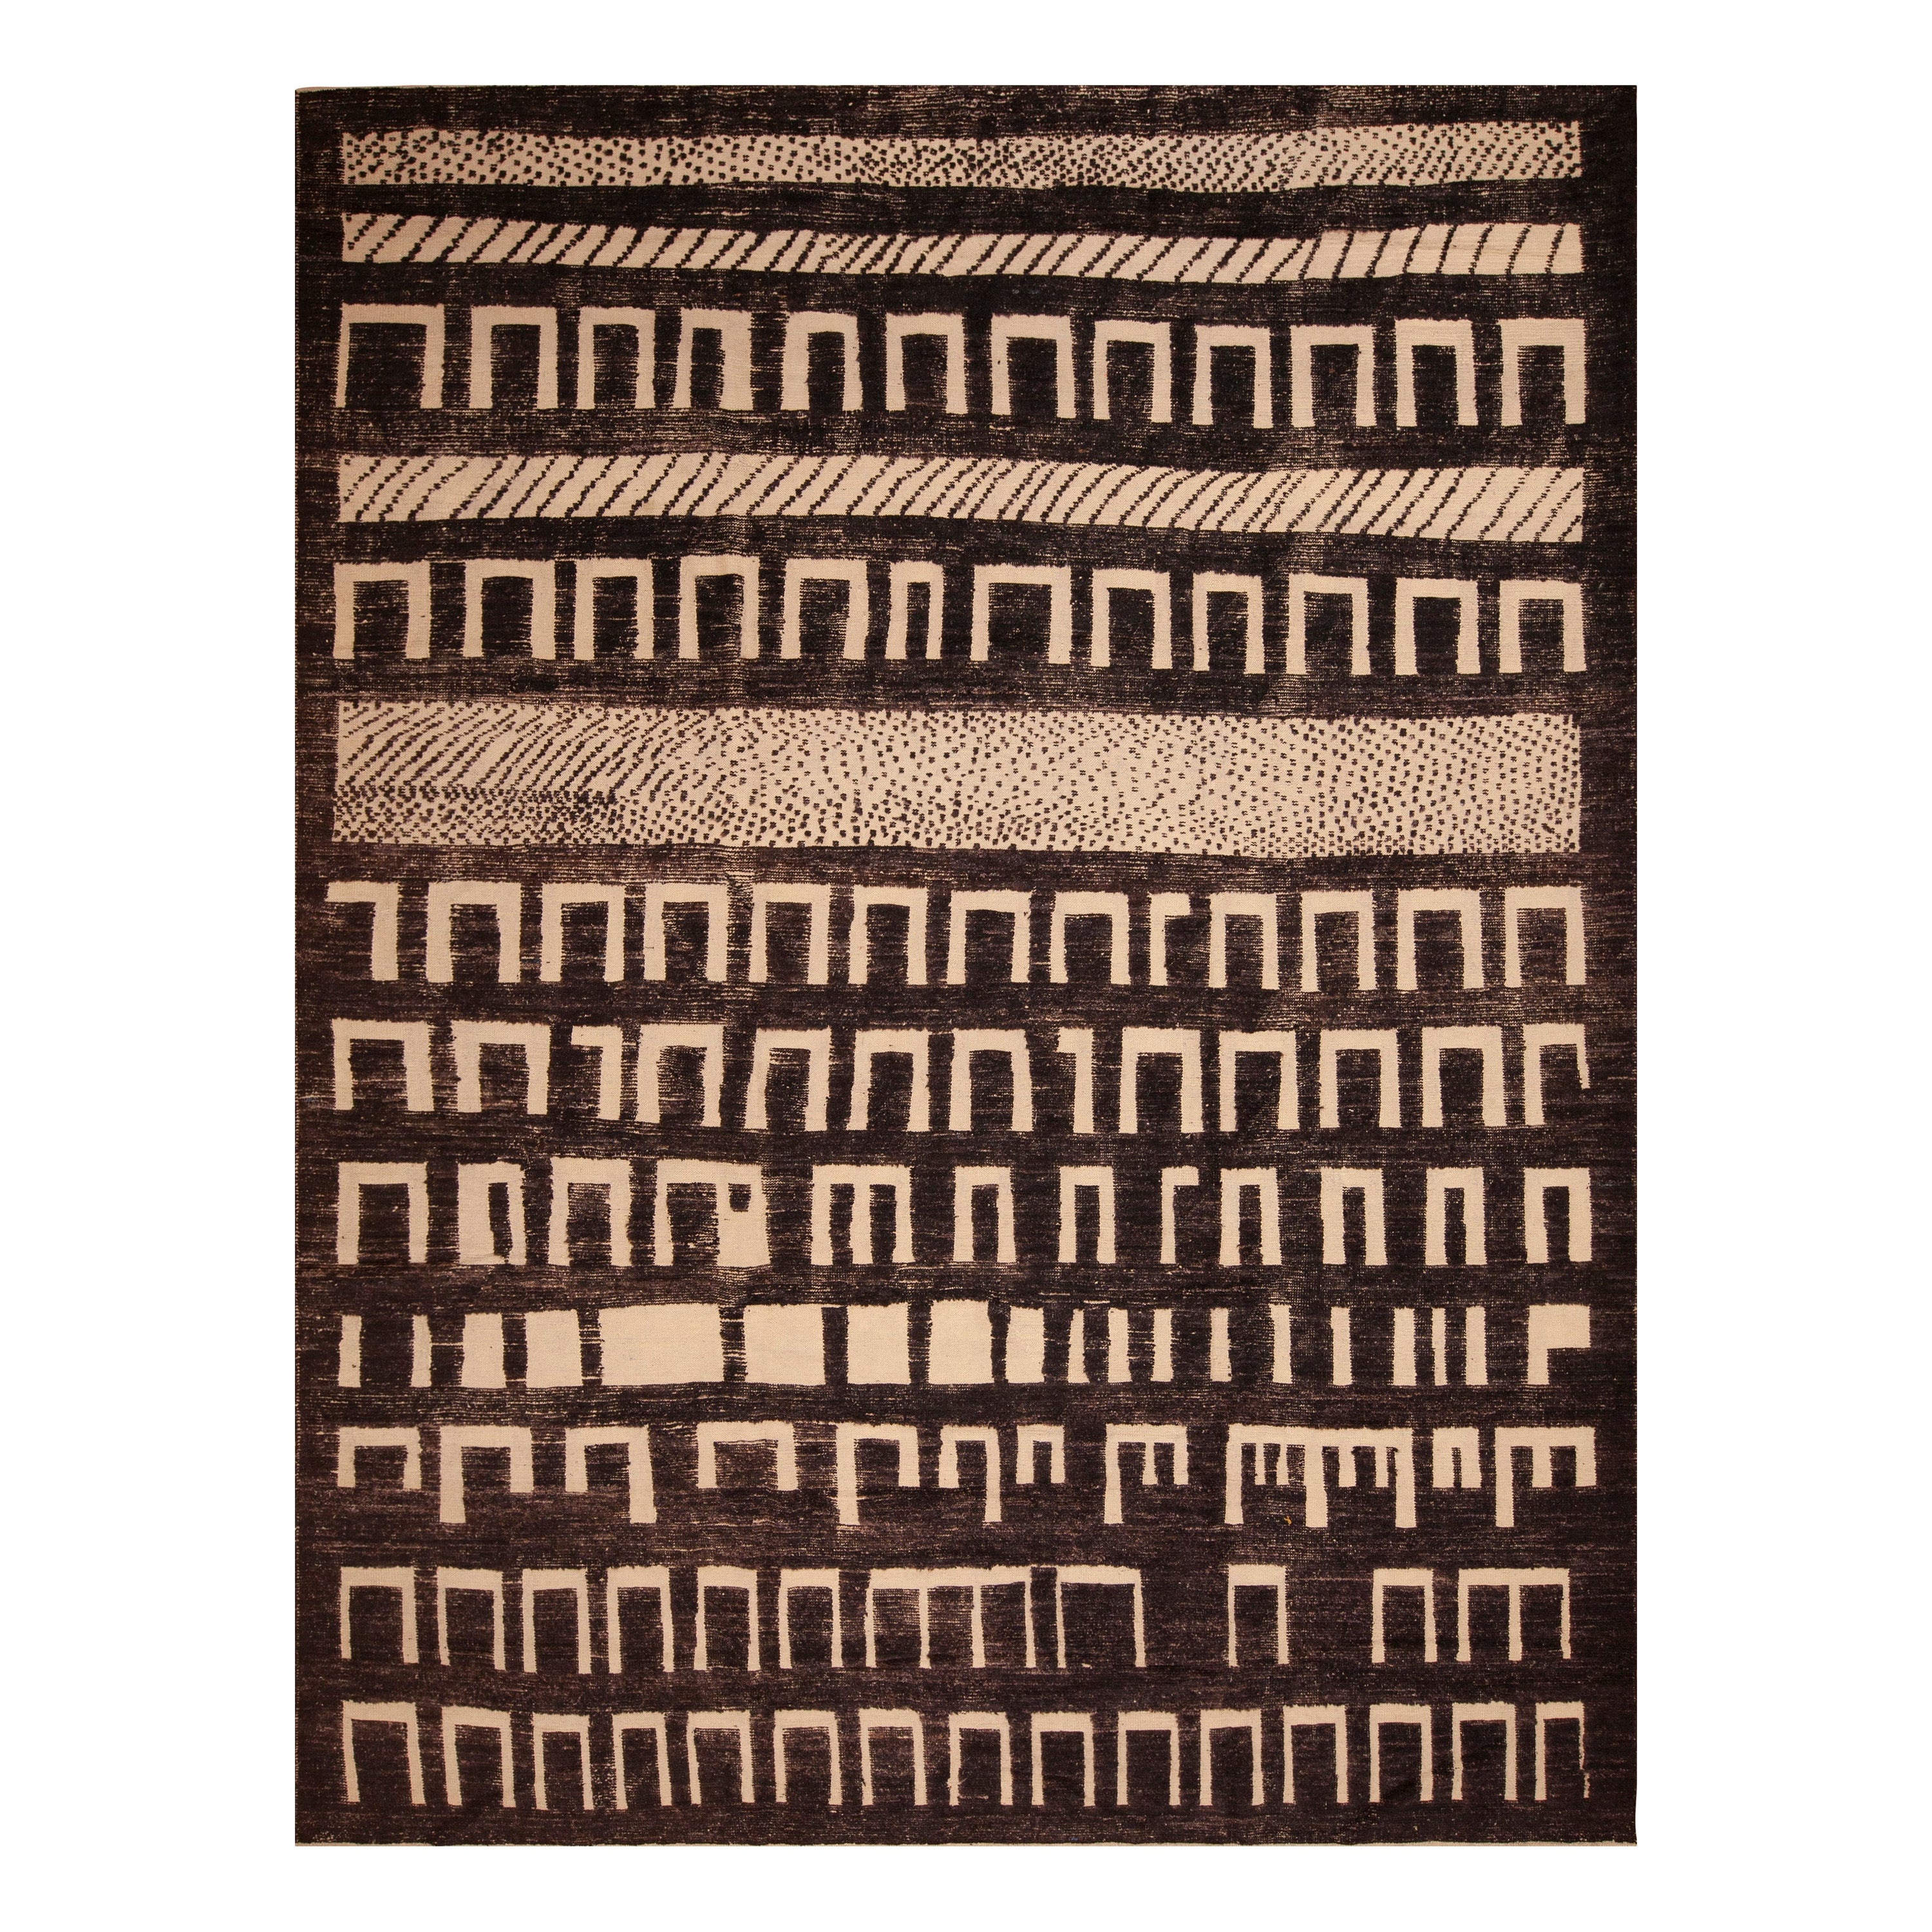 Nazmiyal Collection Graphic Tribal Primitive Geometric Modern Rug 10'3" x 13'8" For Sale